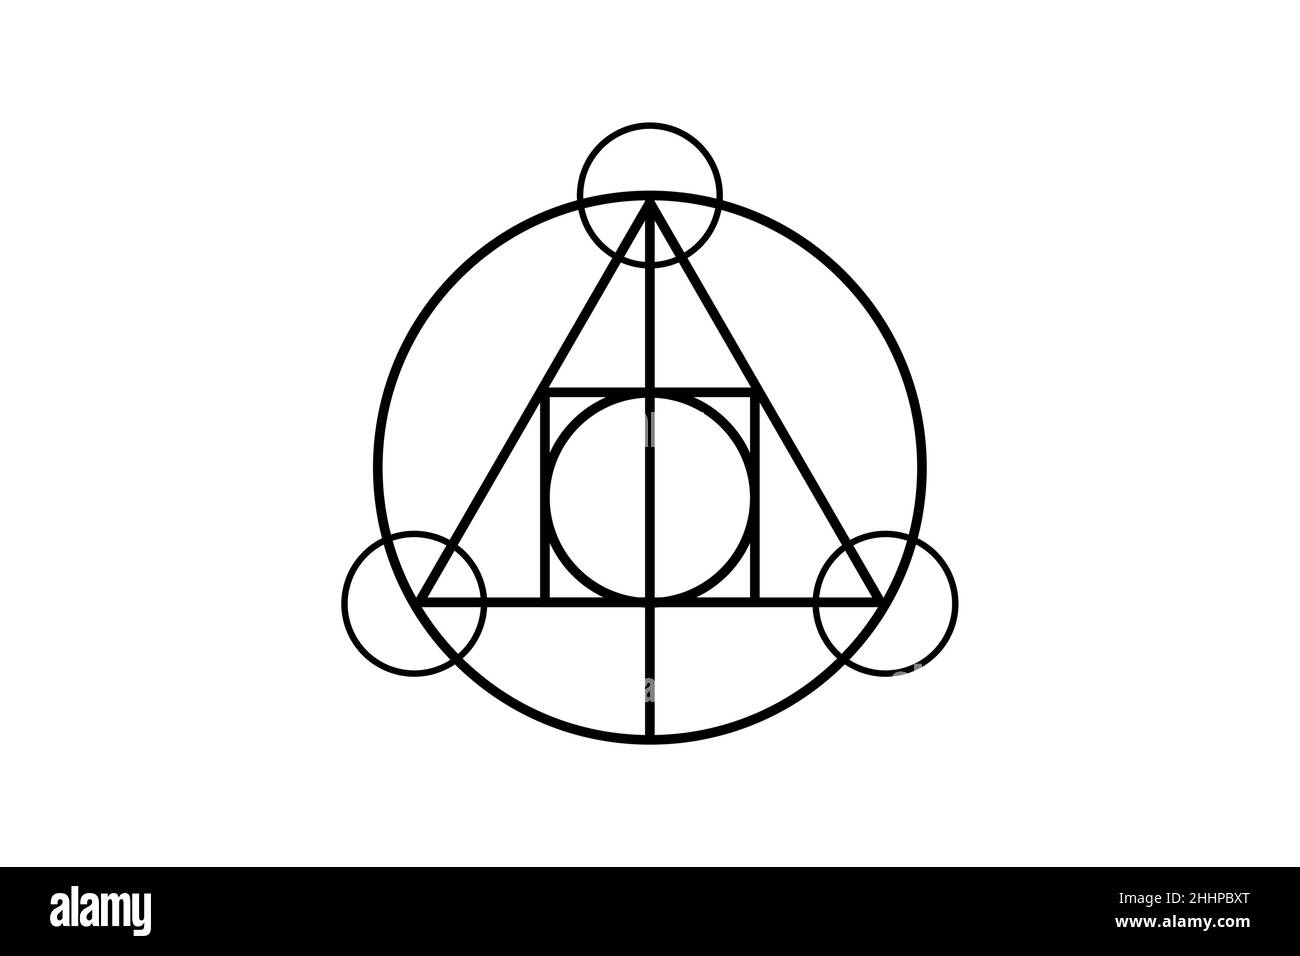 sacred magic geometry , occult symbol , alchemical symbol showing the interaction between the four elements of matter symbolizing philosopher's stone Stock Vector